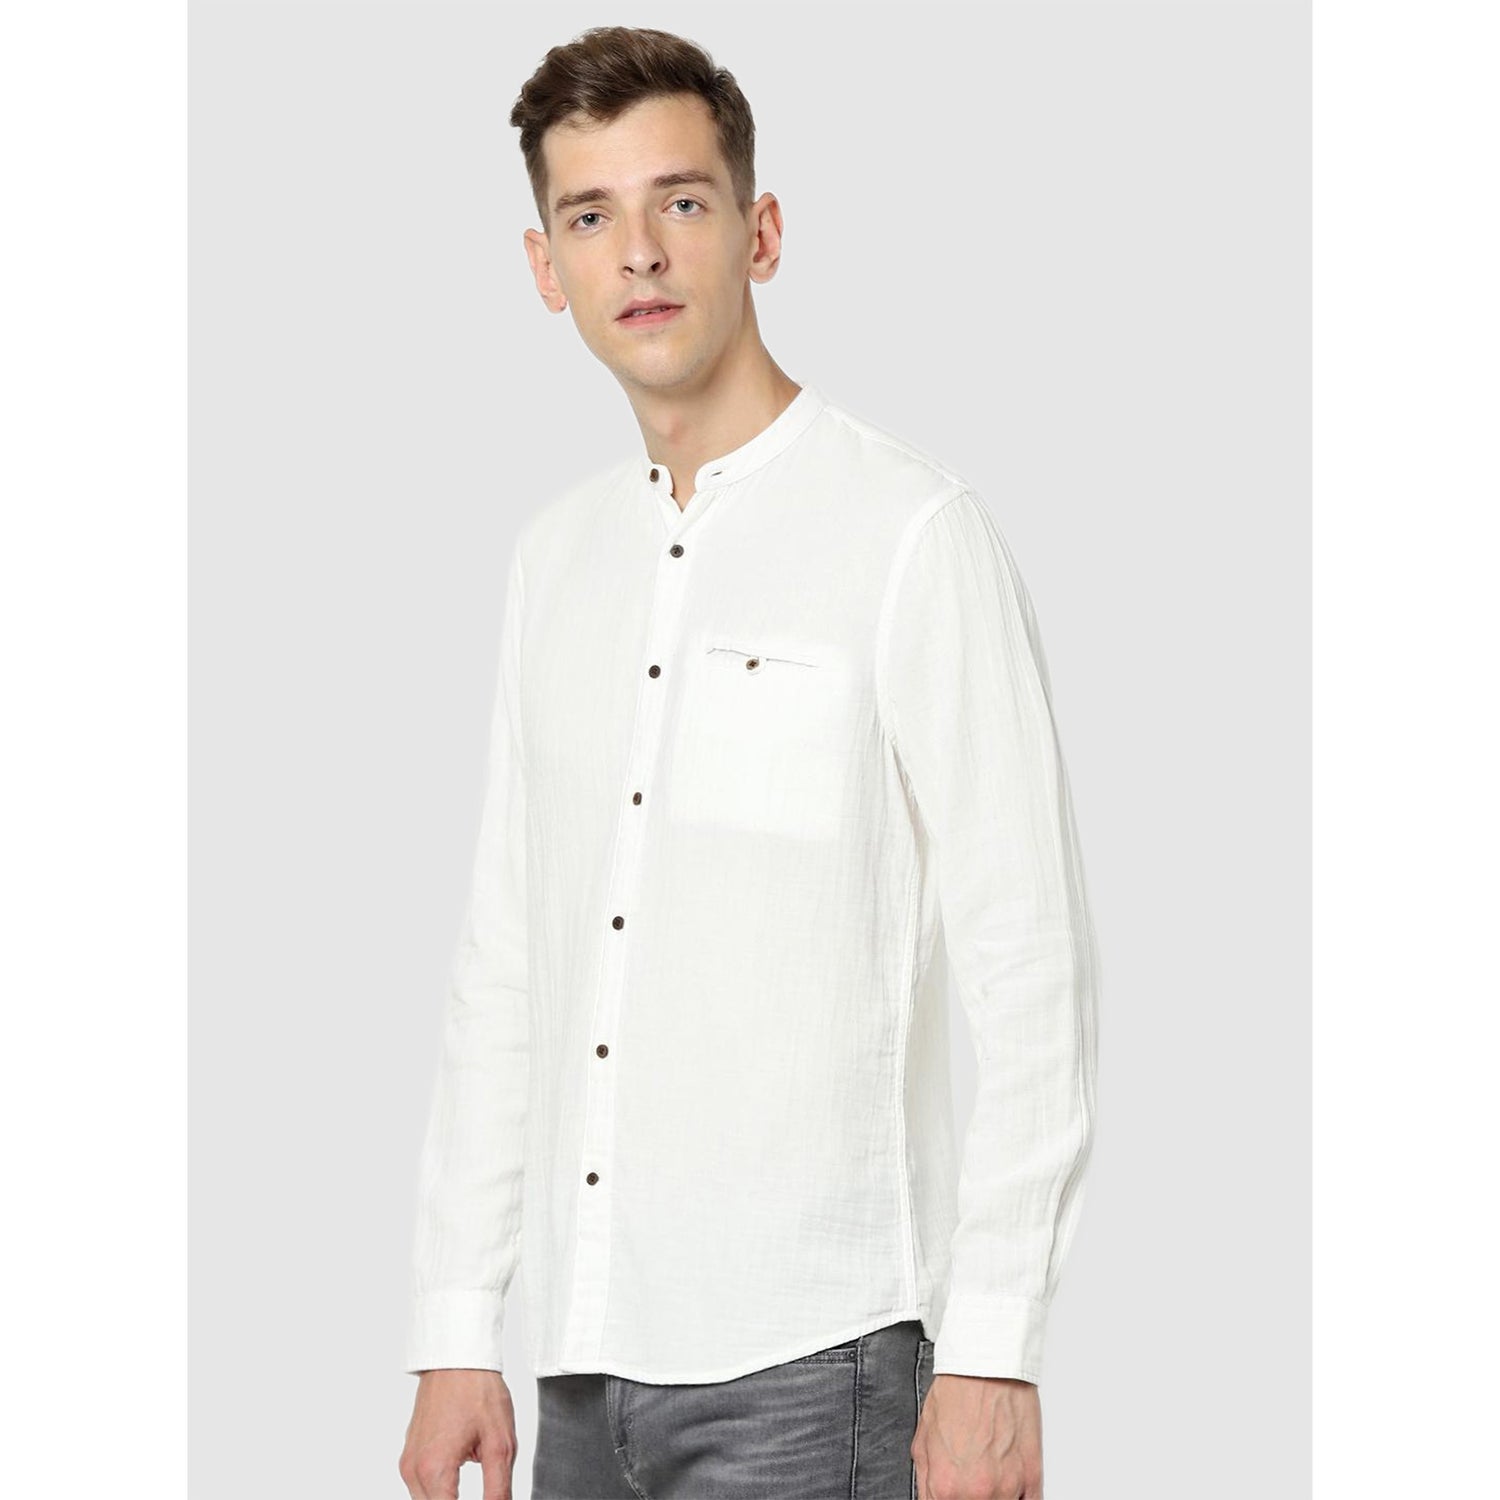 White Solid Classic Casual Shirt (CACHASE)